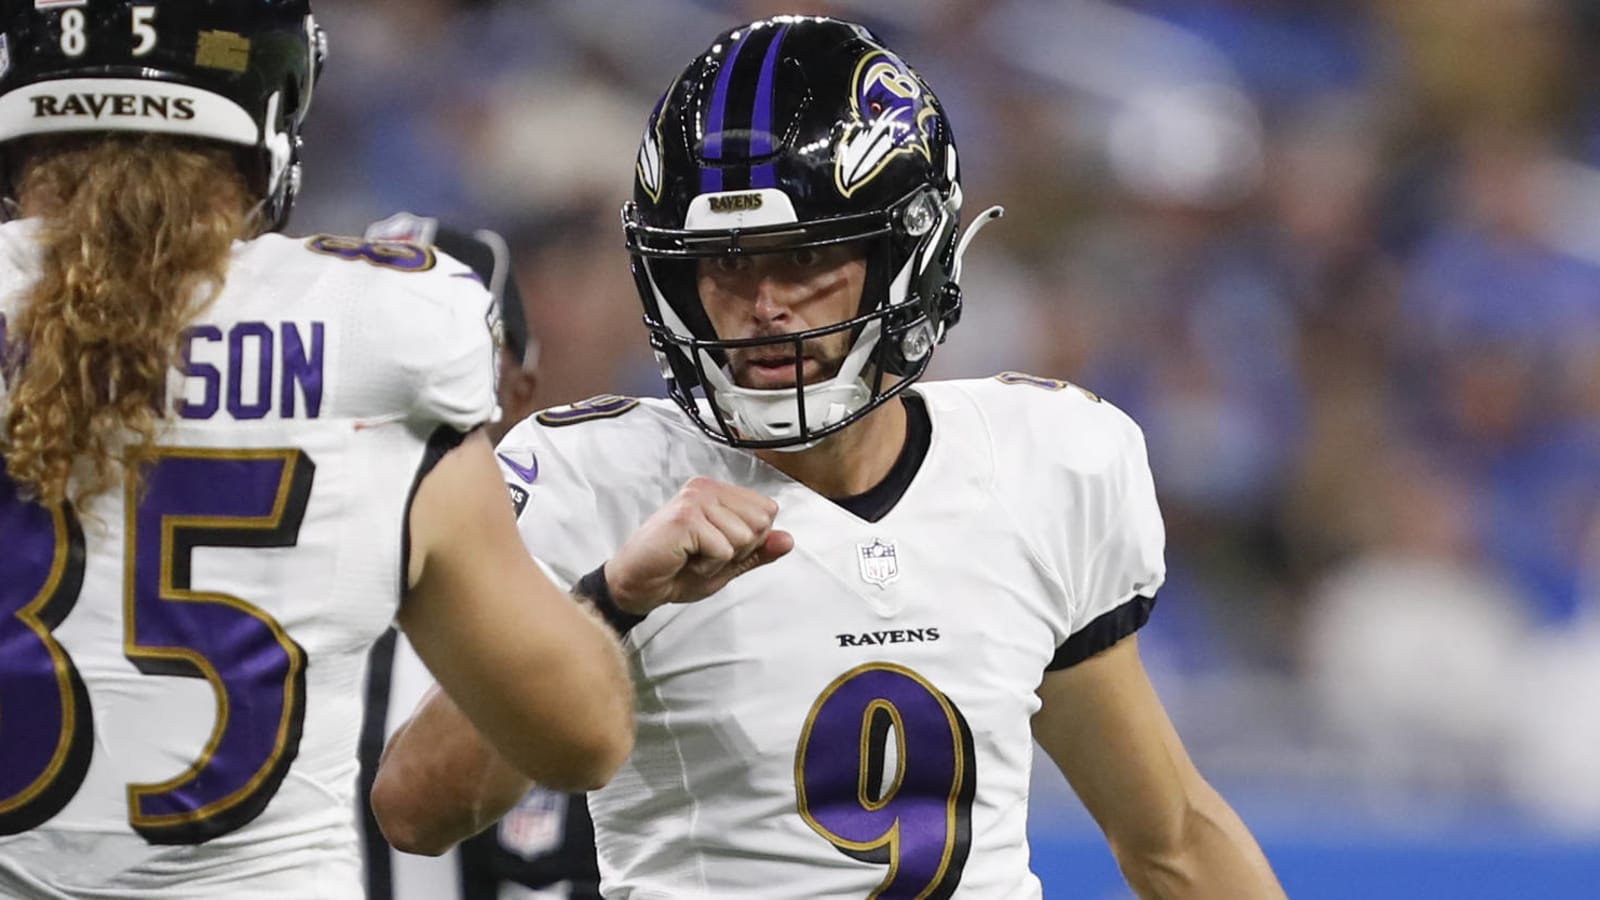 Ravens get away with delay of game before winning field goal